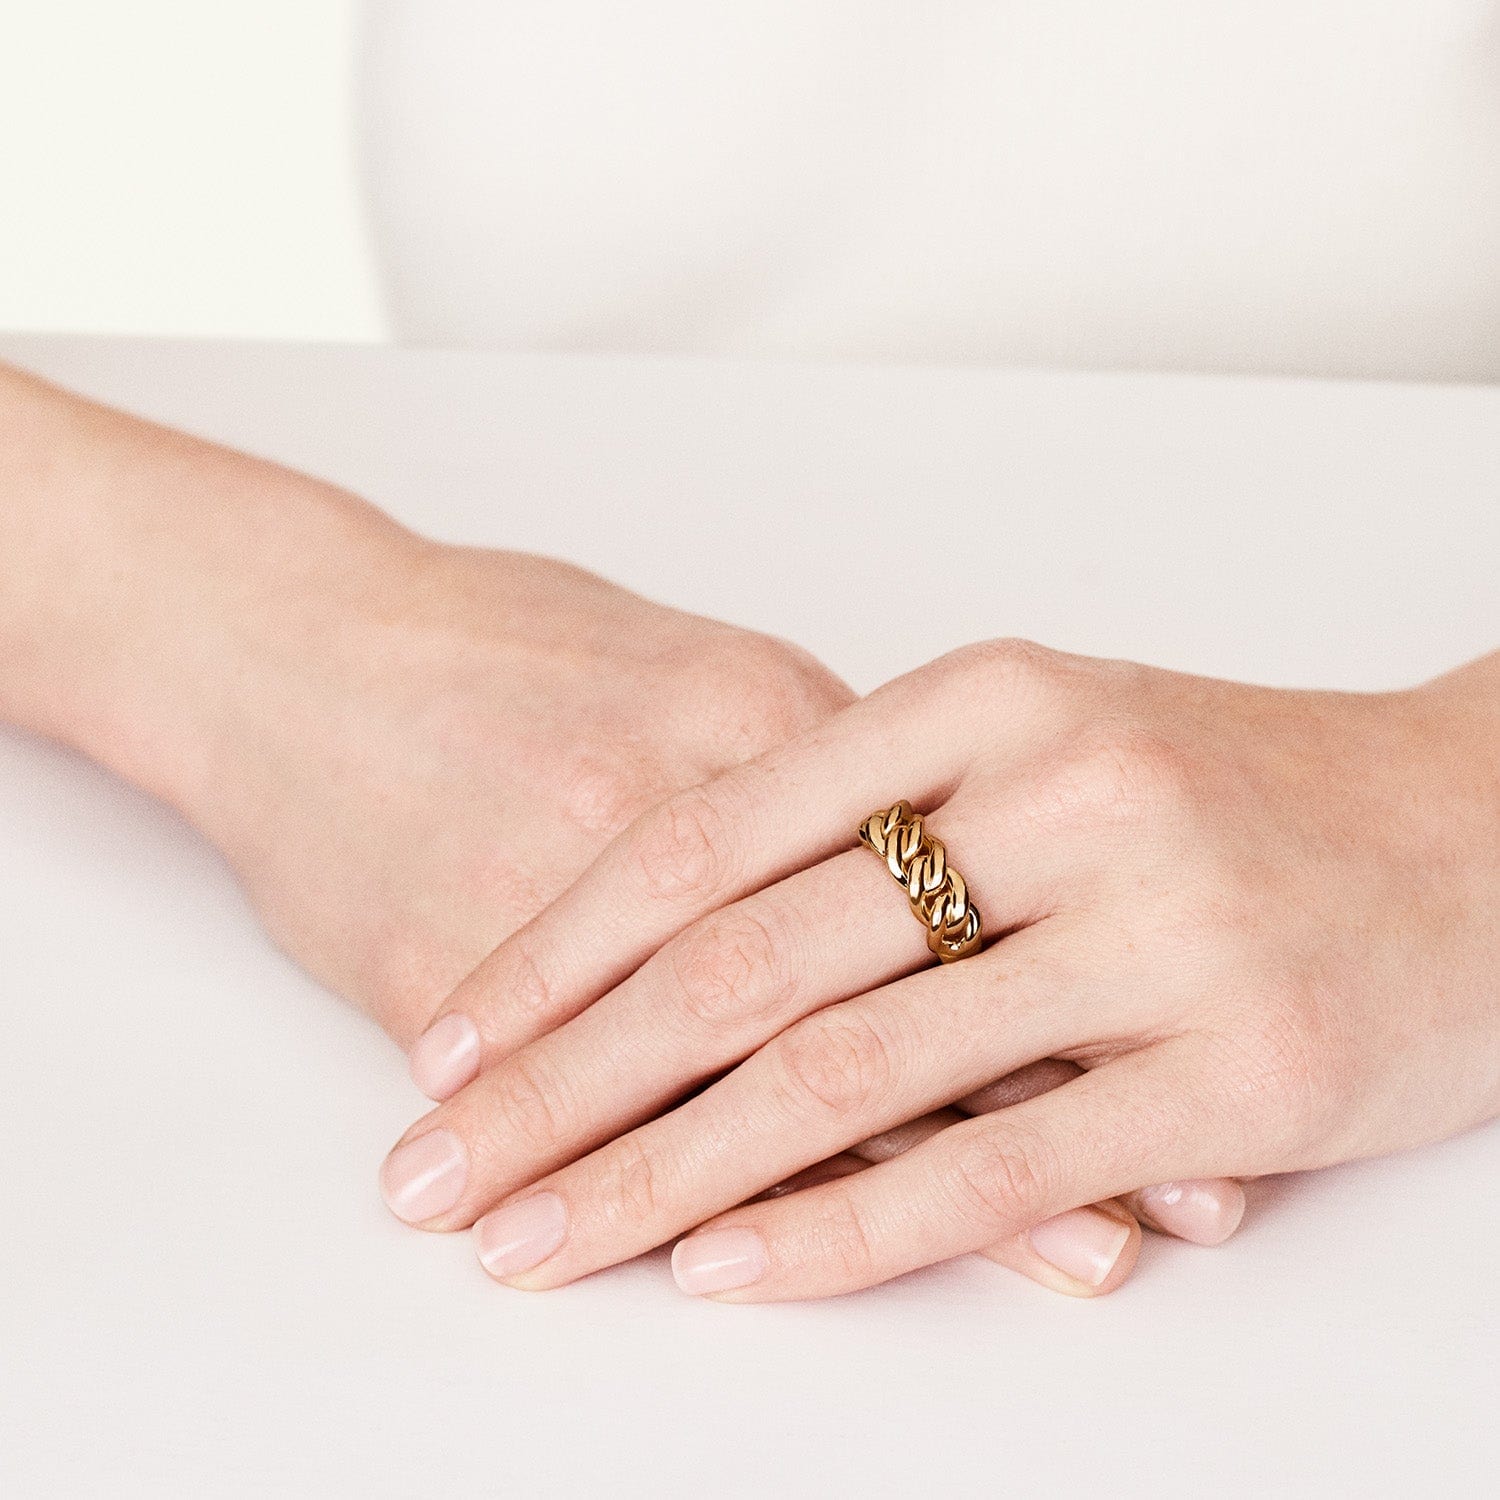 A hand wearing a gold link ring with a chain style pattern.